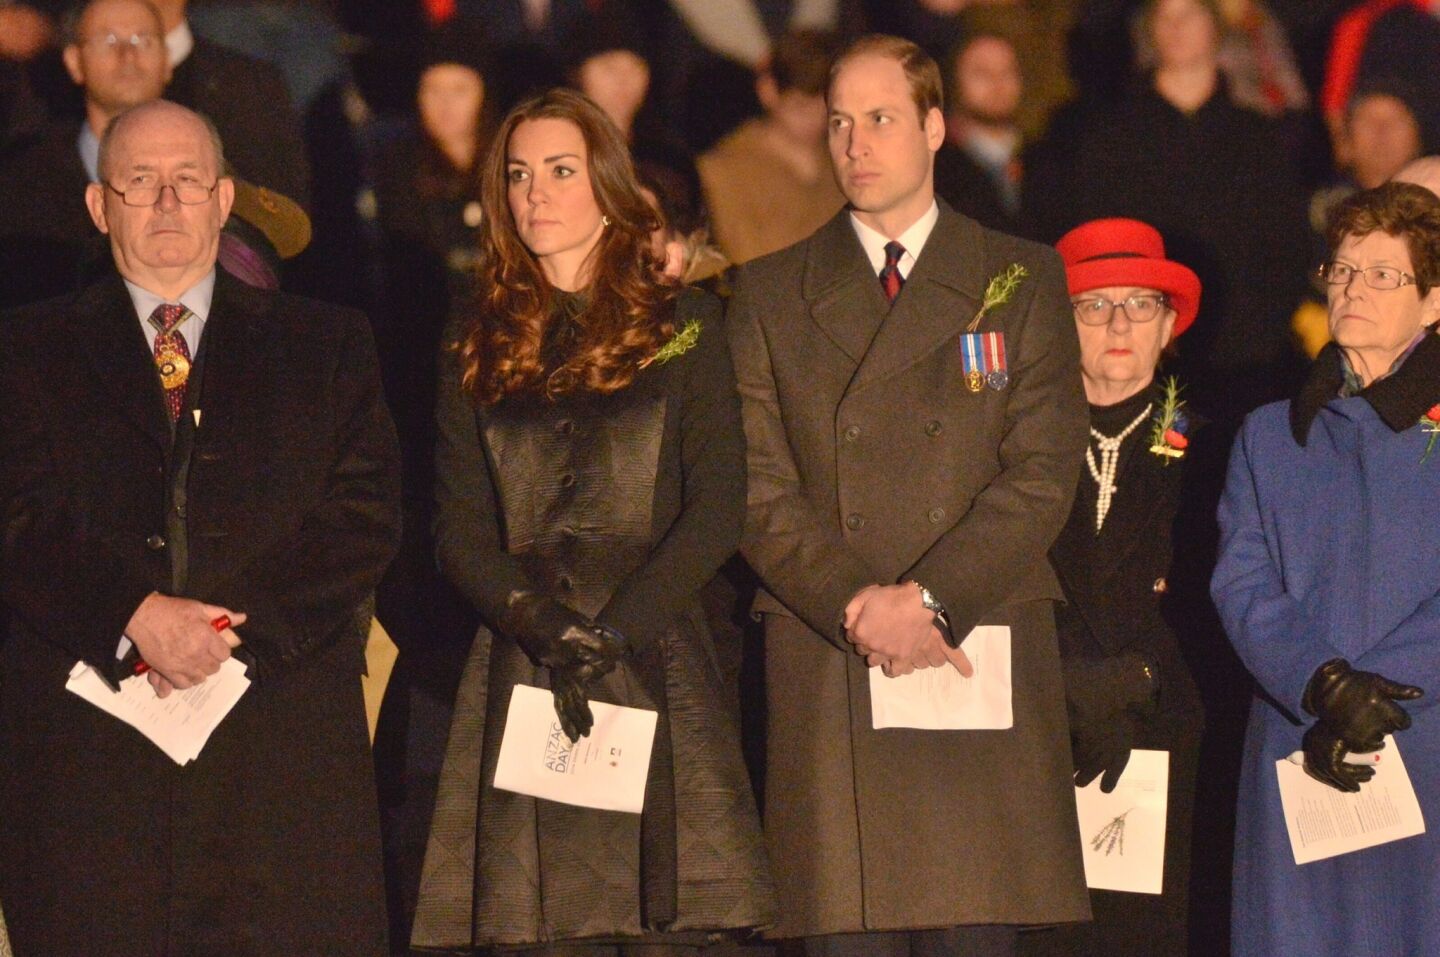 William and Kate attend the ANZAC dawn service to commemorate the 99th anniversary of ANZAC (Australia New Zealand Army Corps) Day, a public holiday commemorated by both nations to remember the dawn landing by Australian and New Zealand soldiers at Gallipoli in 1915. April 25, 2014, marked its 99th anniversary.